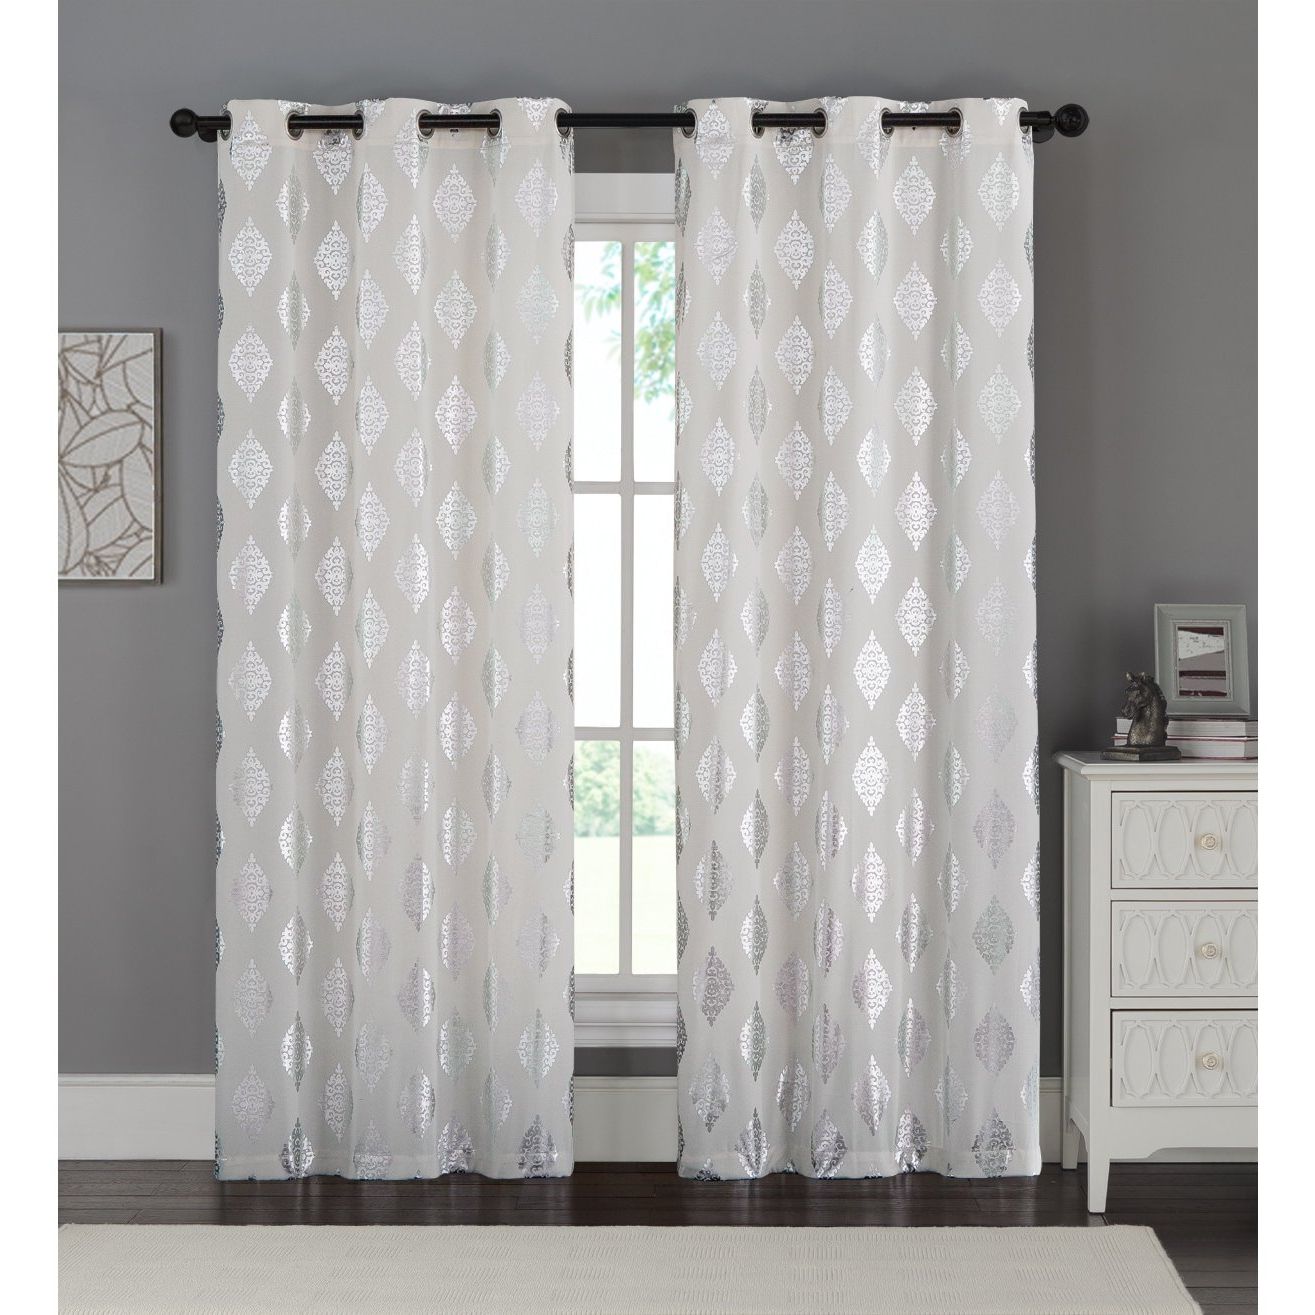 Recent Caldwell Curtain Panel Pairs In Vcny Home Sorento Window Treatment Curtains 76x95, White (View 12 of 20)